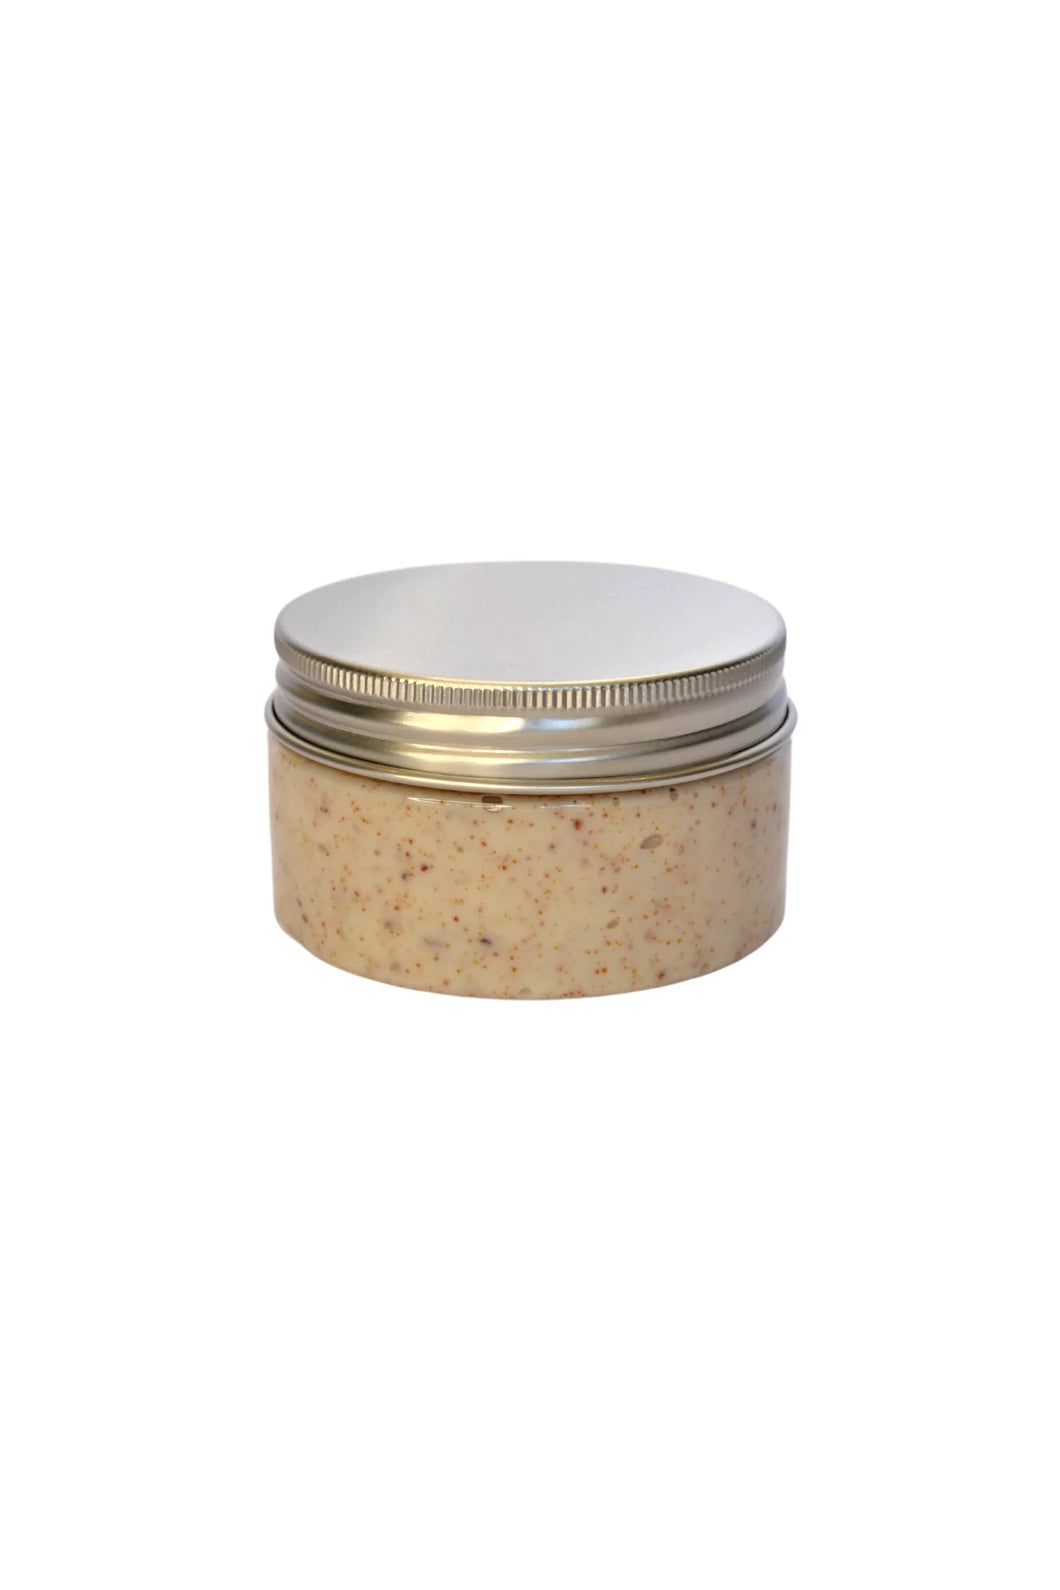 Skin lightening facial scrub enriched with kojic acid, licorice root and niacinamide